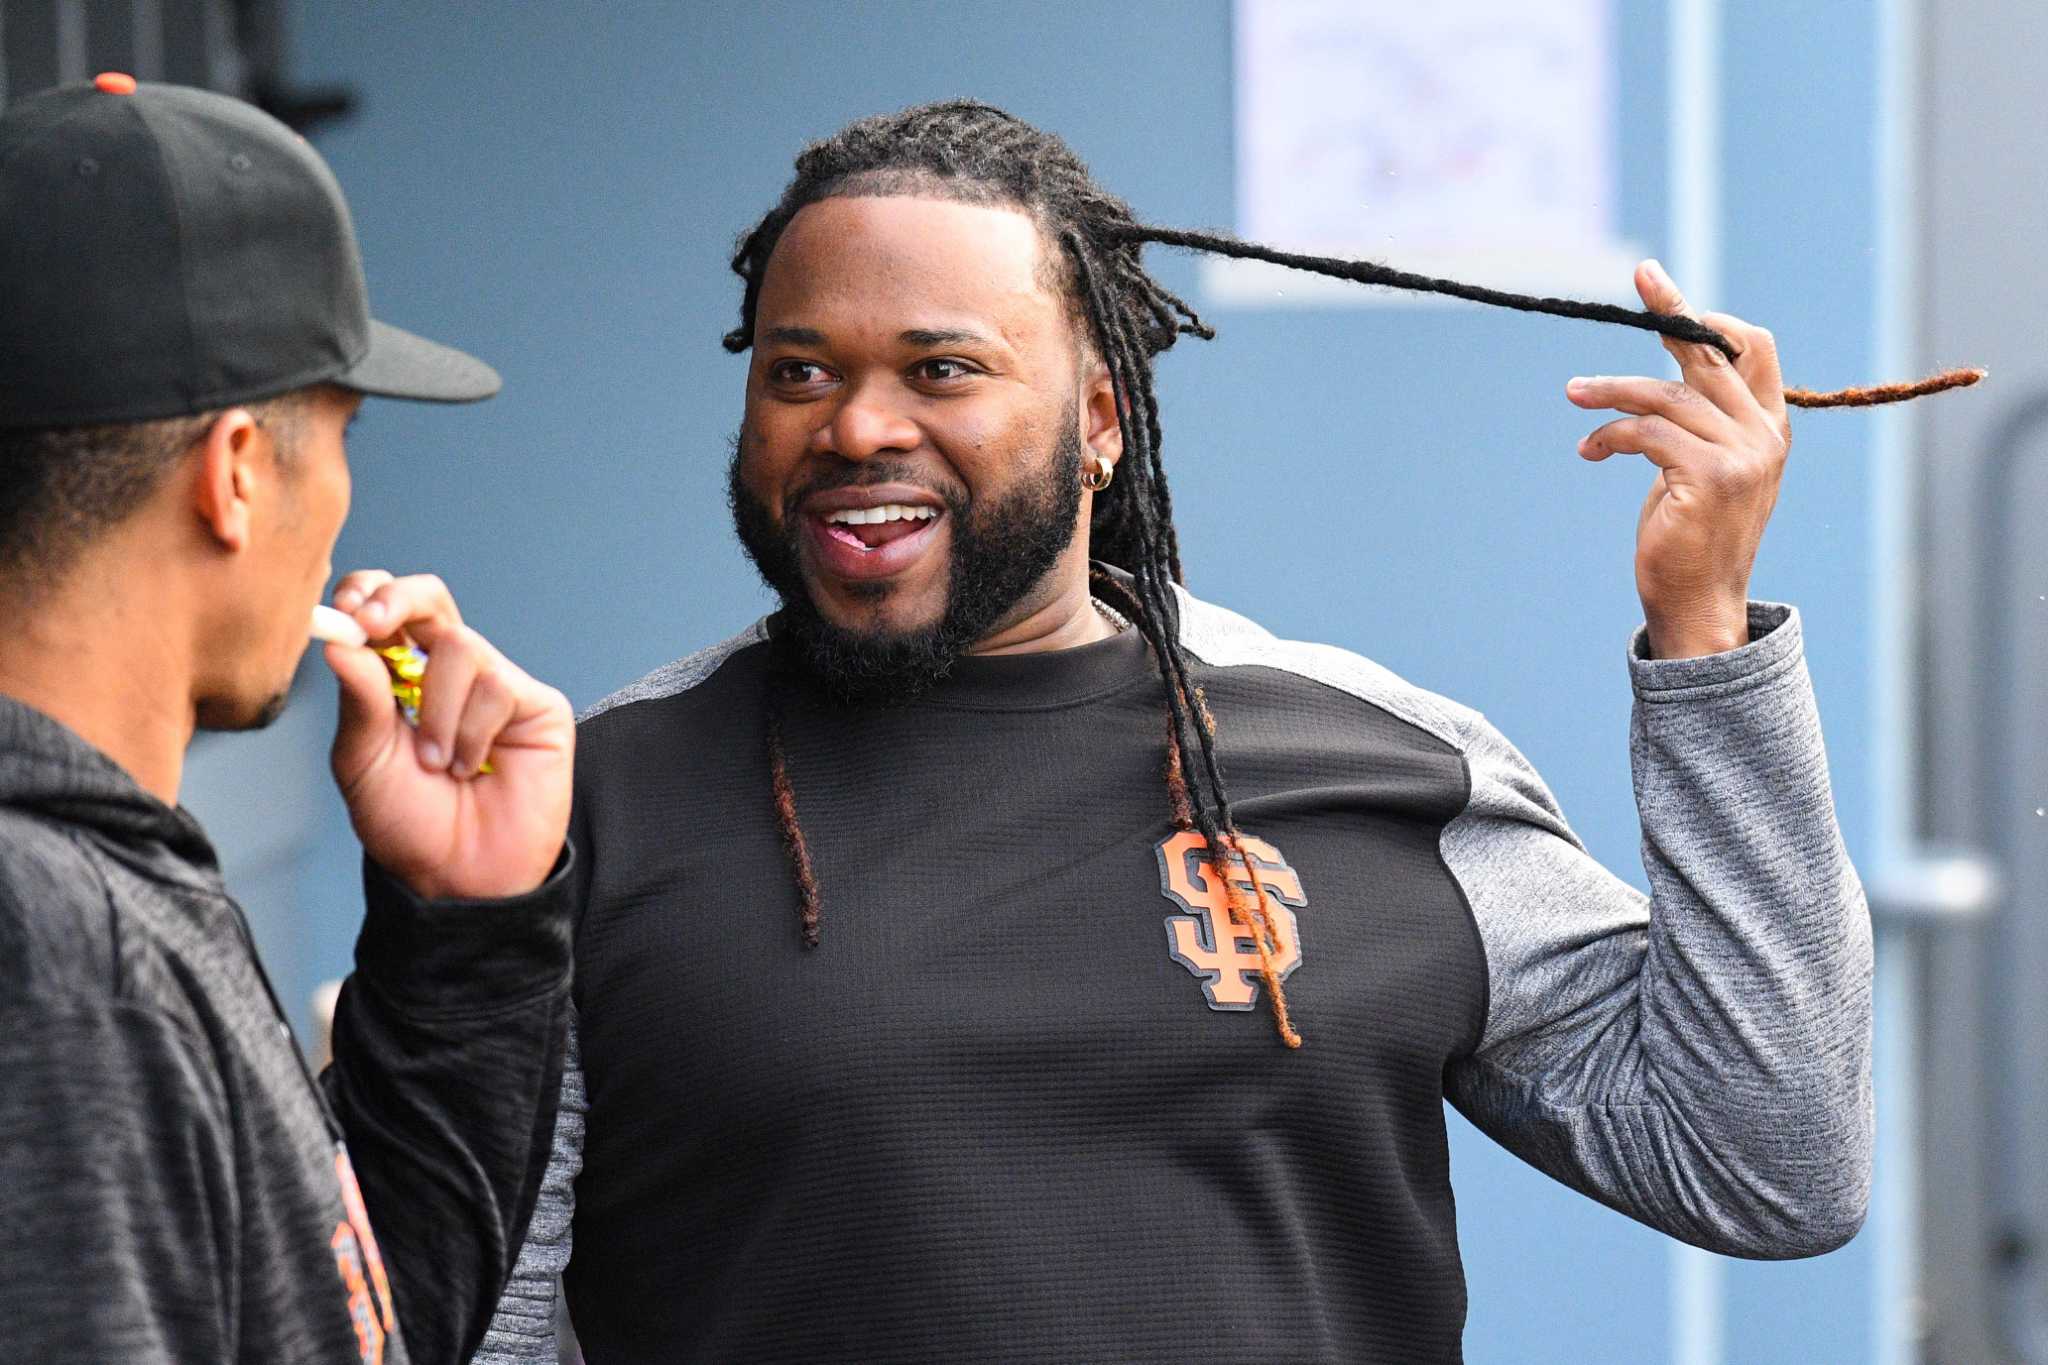 Giants notes: Johnny Cueto won't return this weekend, may need a rehab  start – East Bay Times